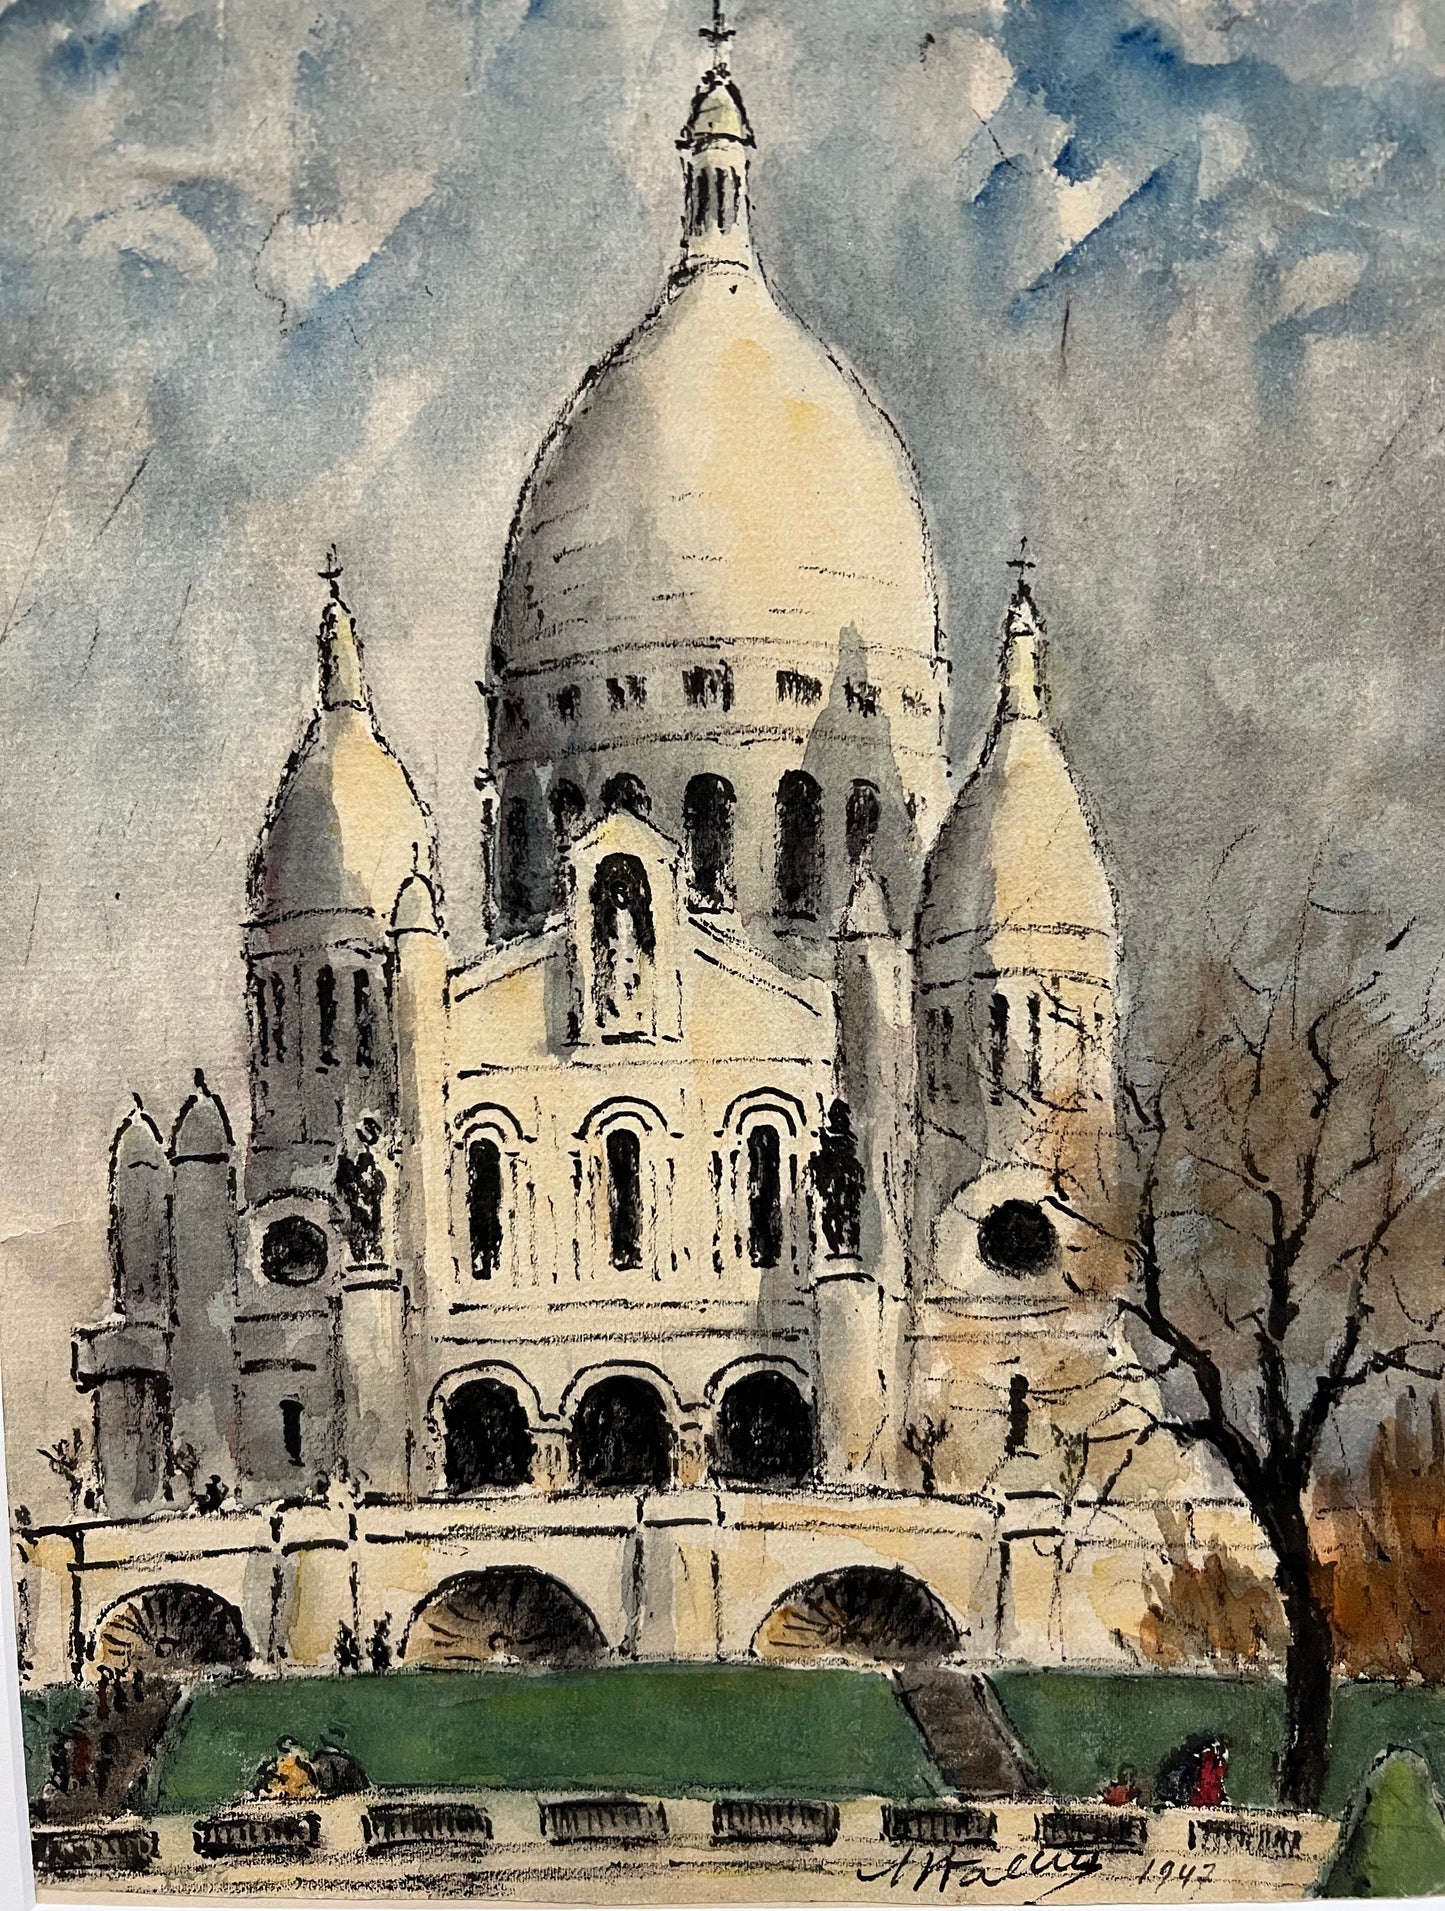 Sacre Coeur and Montmartre (8.5" x 10.75")